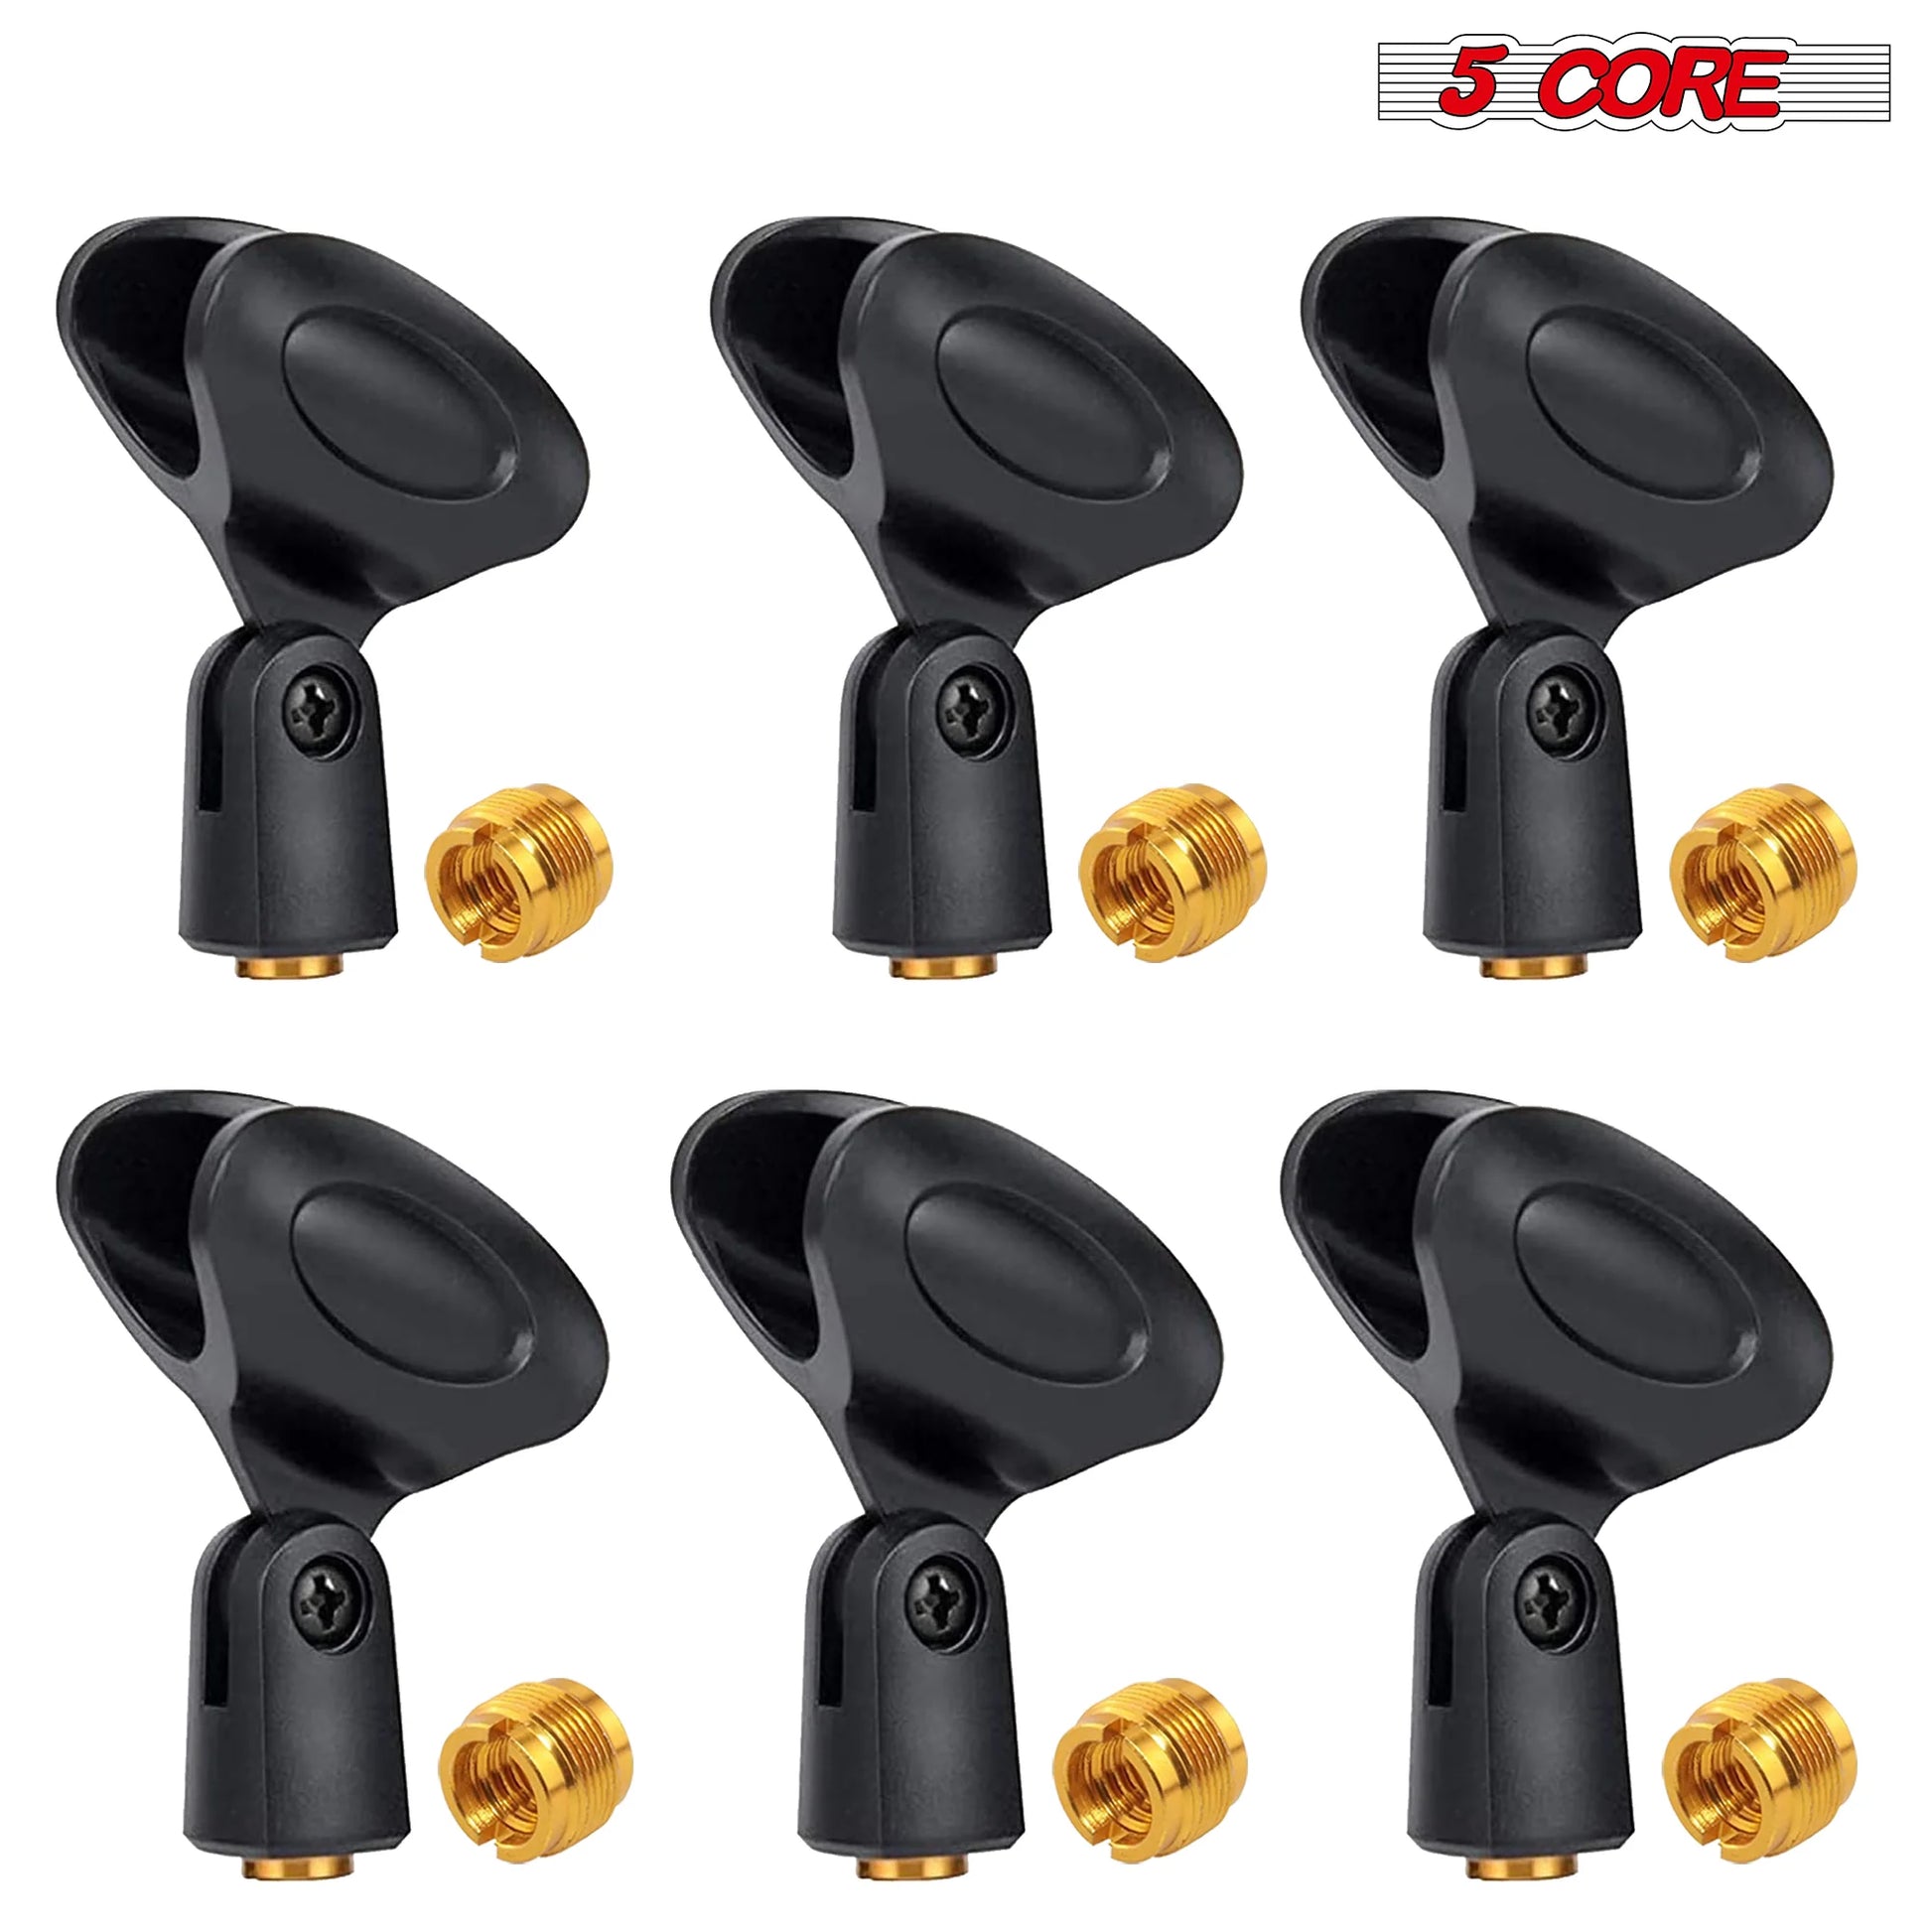 5 Core Universal Microphone Clip Holder| Durable Mic Clip with Nut Adapters 5/8" to 3/8", 6 Pack, Black- MC 02 6PCS